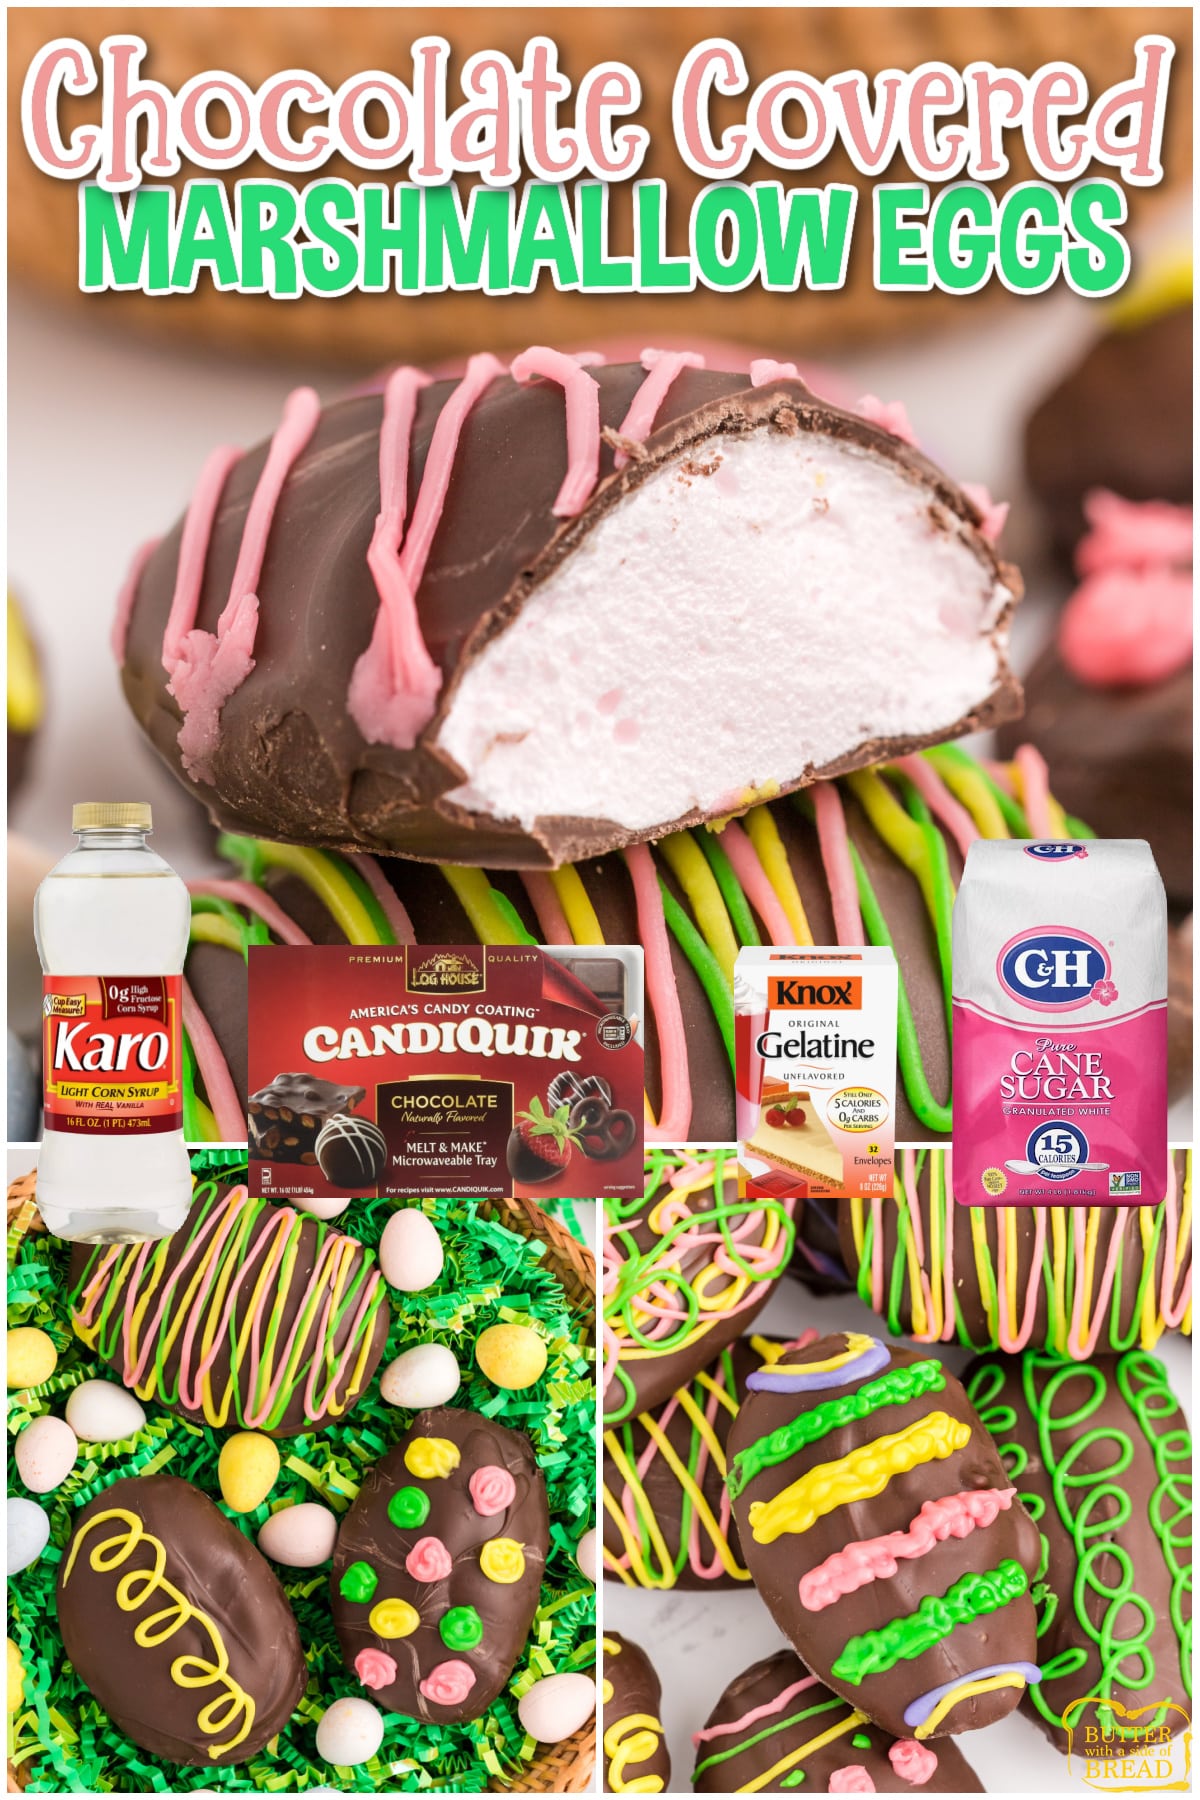 Chocolate Covered Marshmallow Eggs are so fun to make for Easter! Marshmallow Eggs can be made in any flavor and they taste so much better than the store-bought variety.